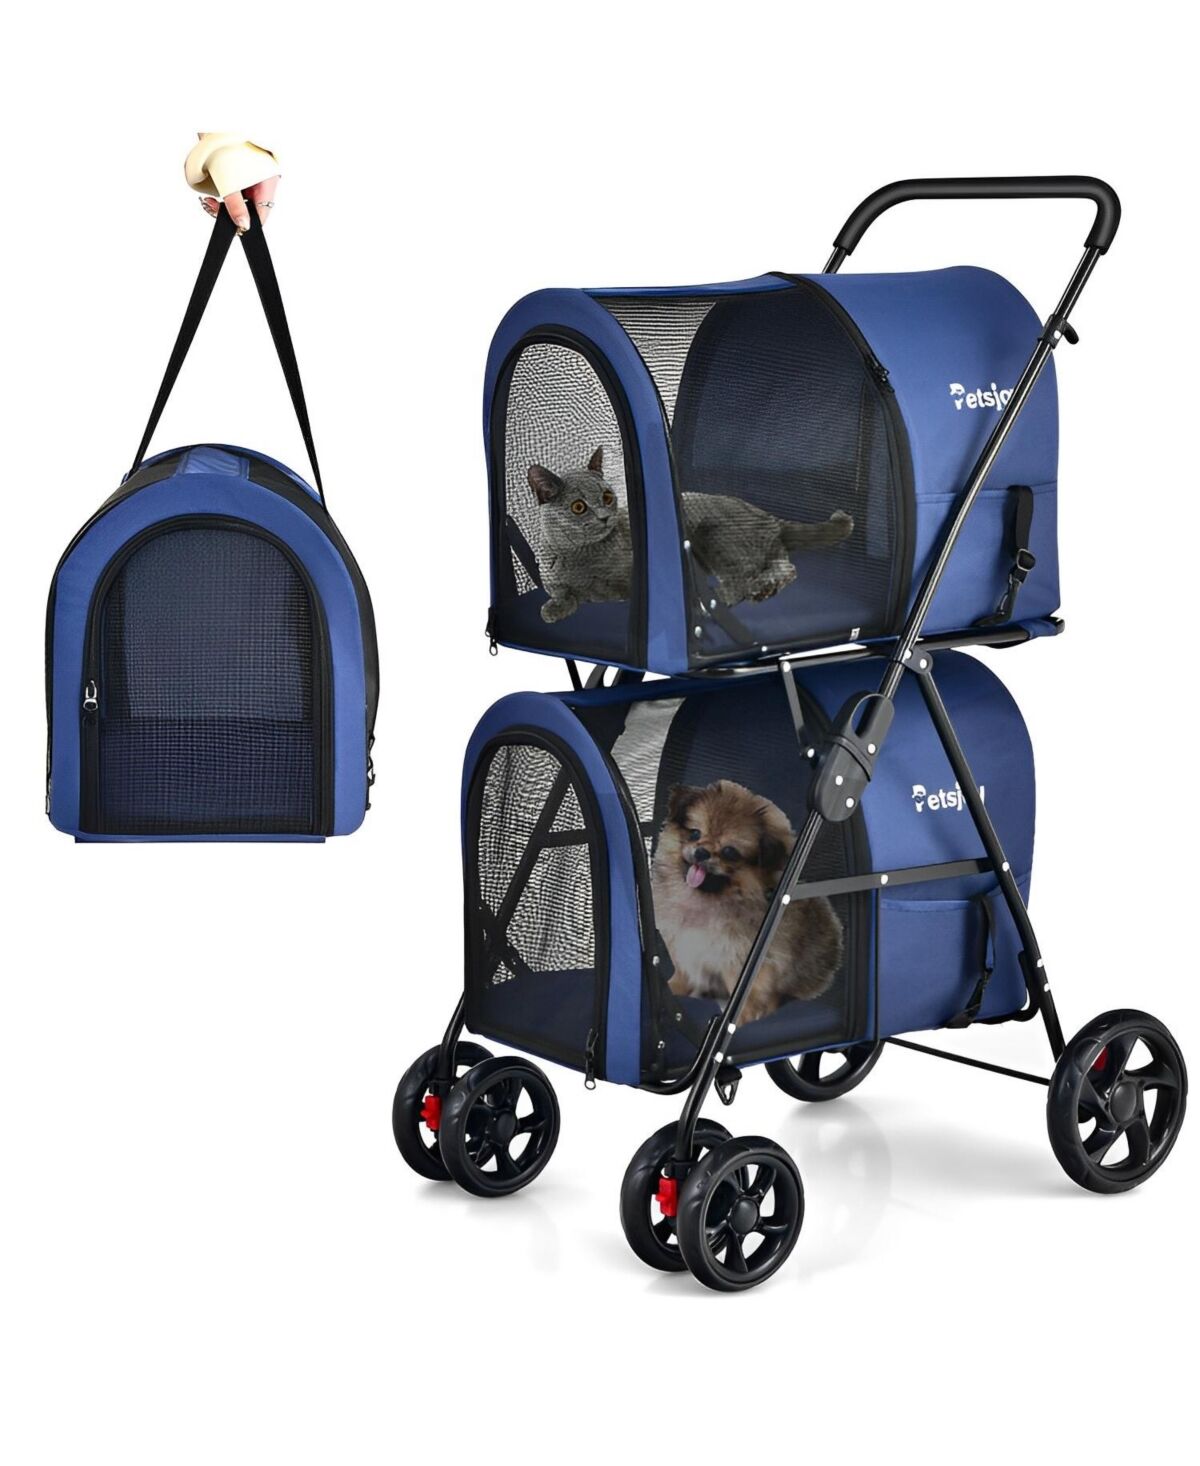 Sugift 4-in-1 Double Pet Stroller with Dog/Cat Carriers and Travel Carriage - Blue